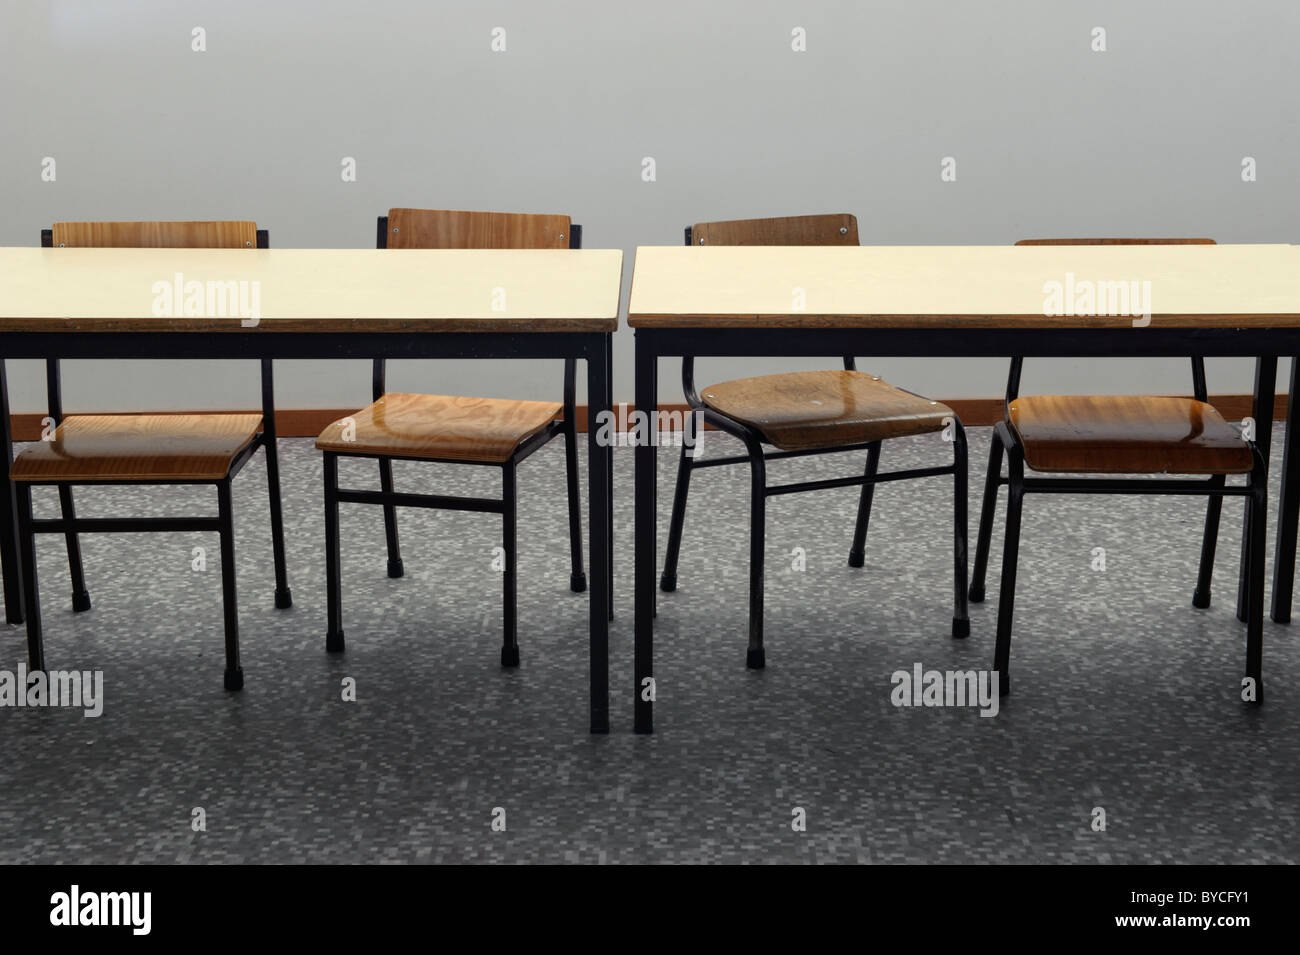 Desks and chairs at an empty classroom Stock Photo